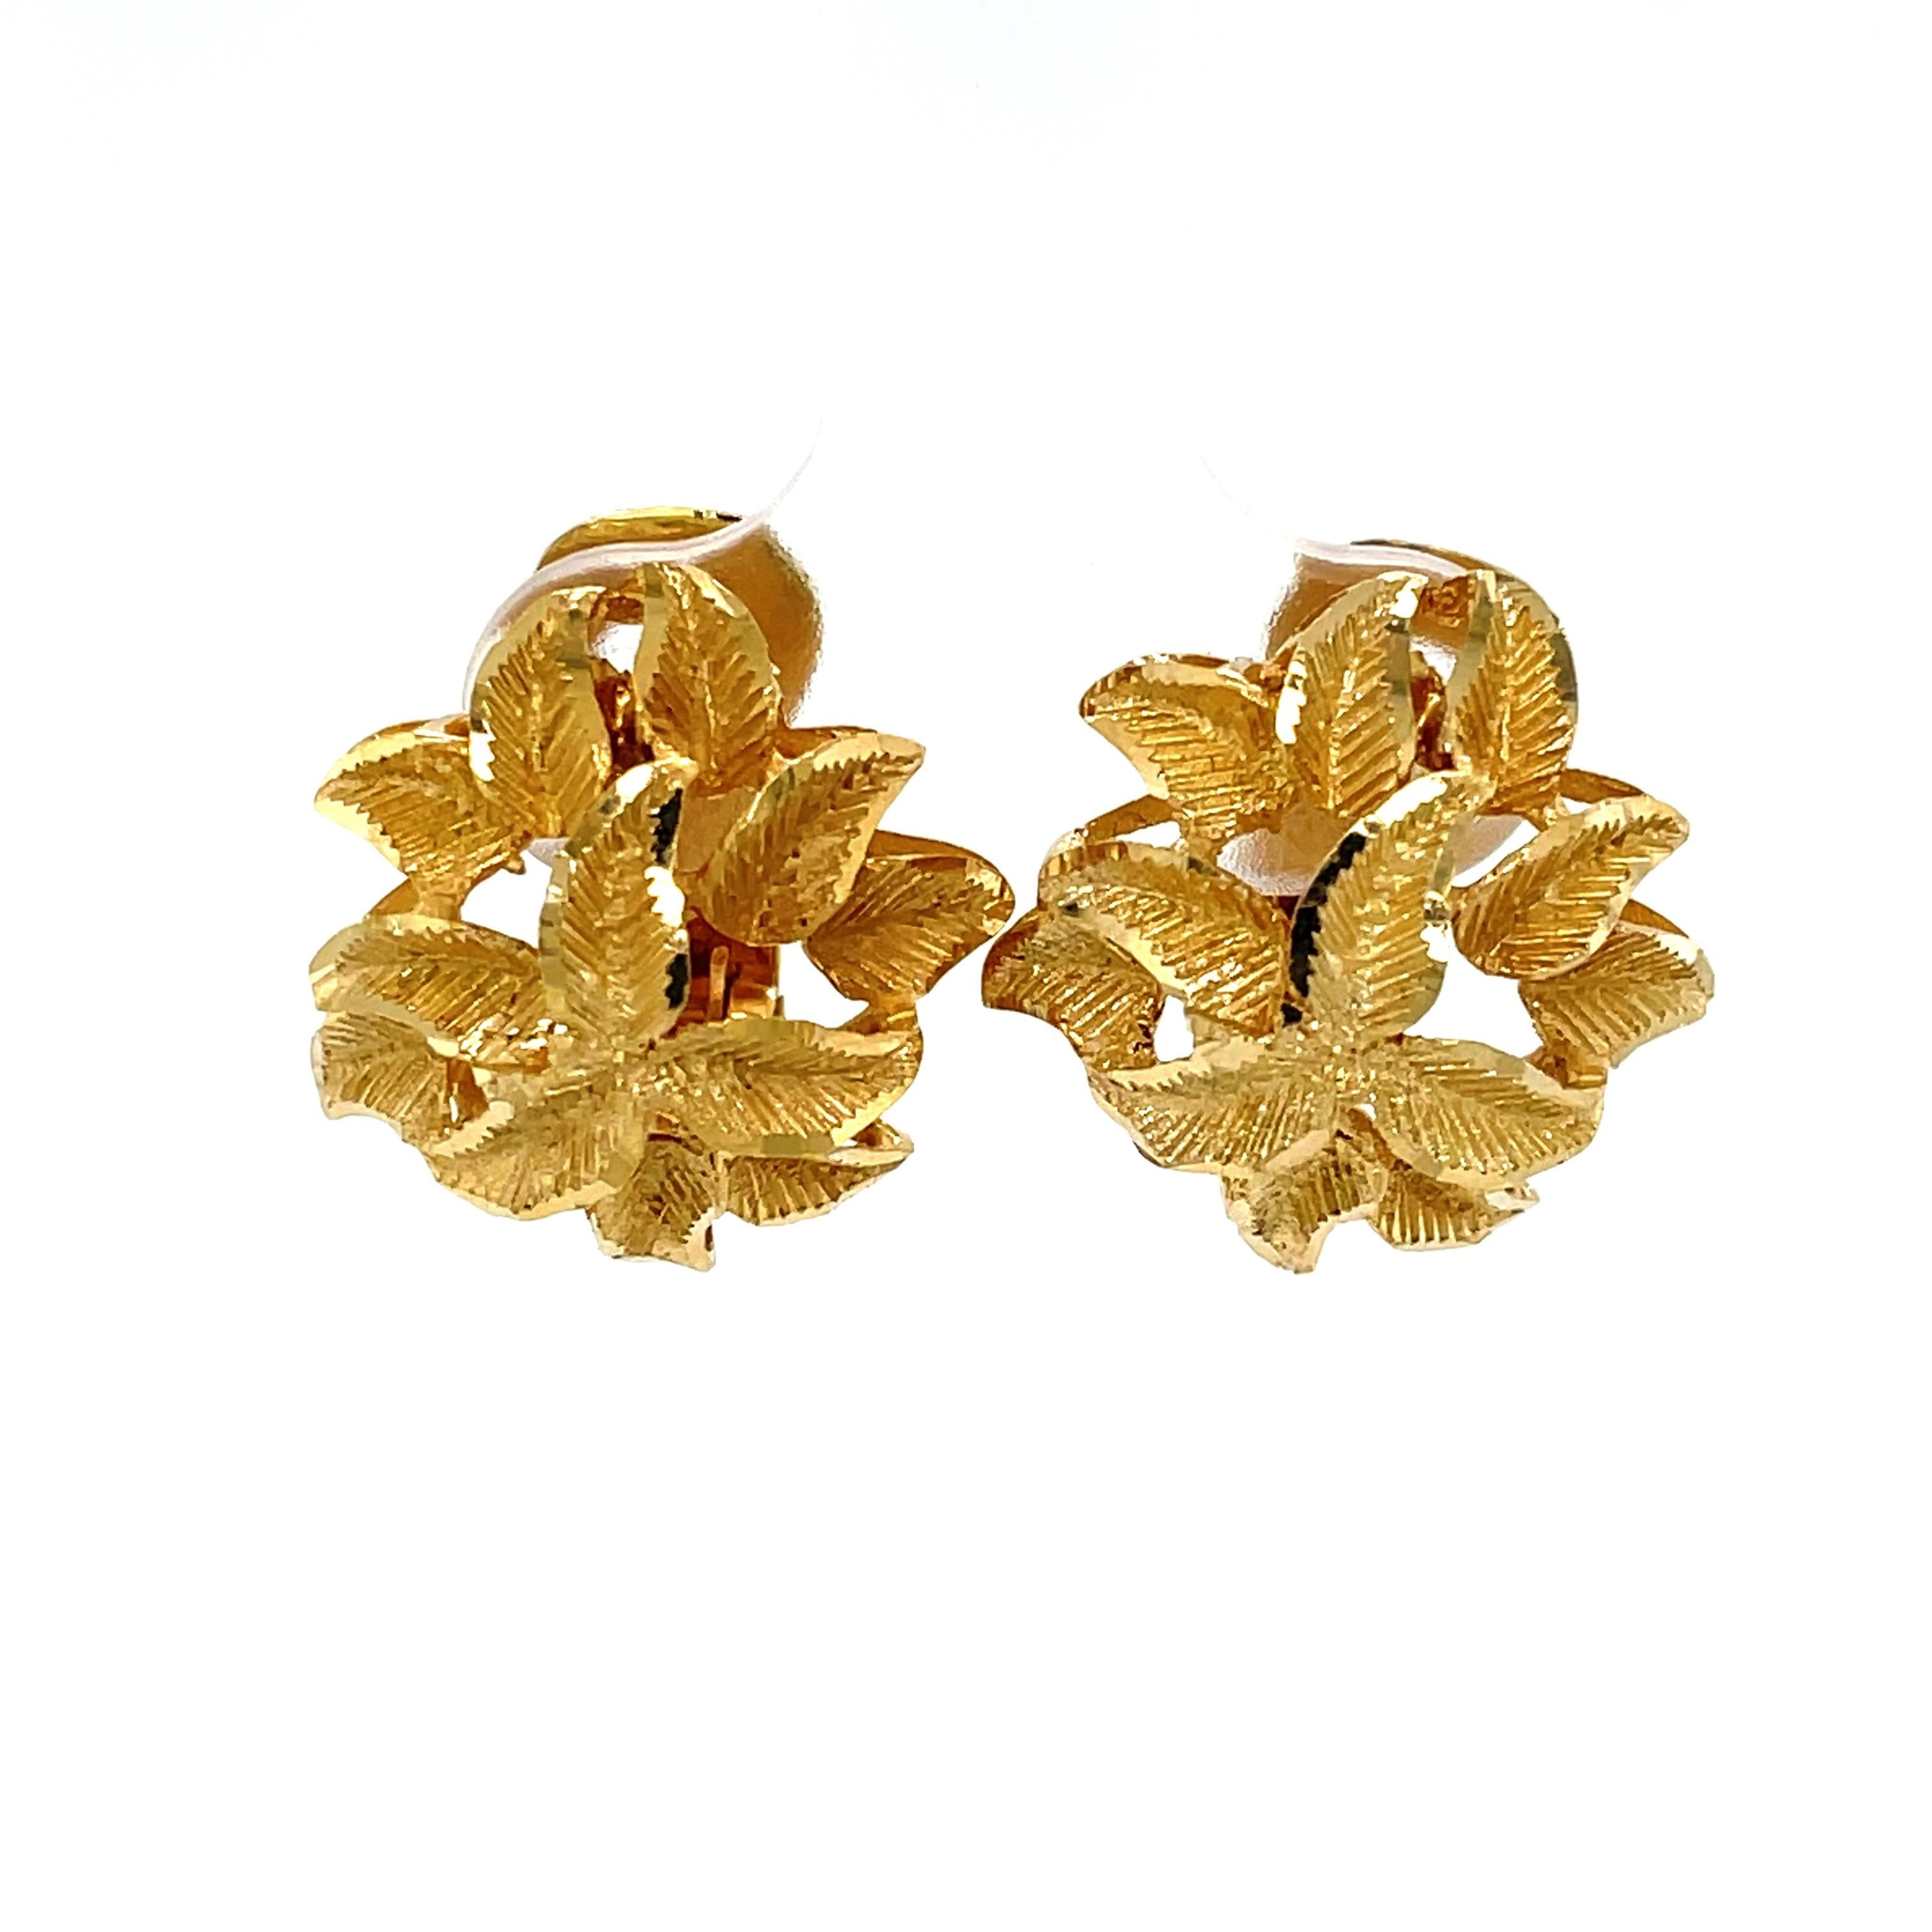 Just right to brighten your look for career or special occasion, this modest 14 karat yellow gold earing pair presents beautifully. A demur floral inspired design is brought to life by its frosted gold finish and gives these 16.5mm round earrings